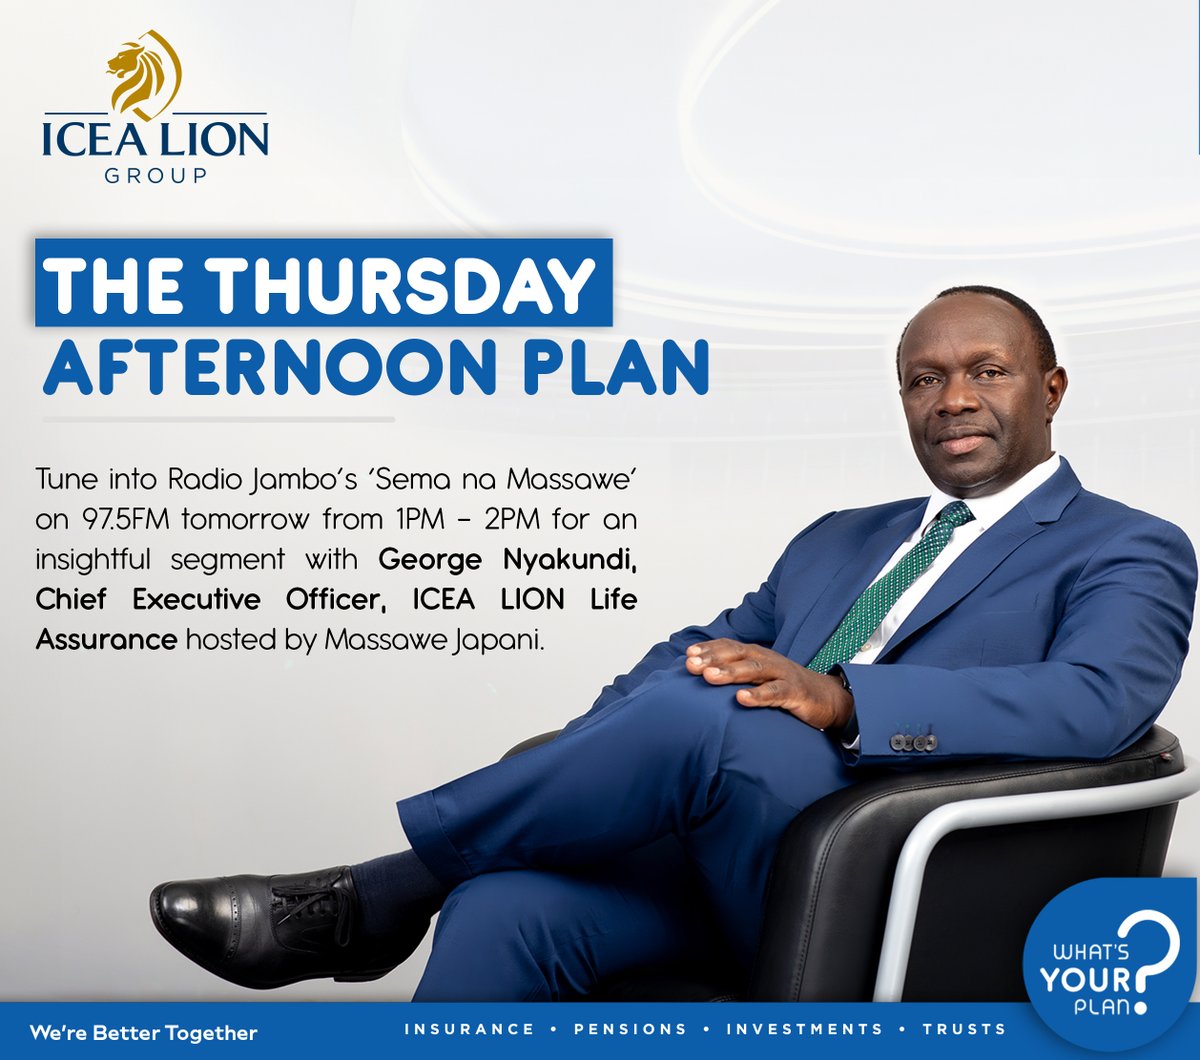 Don't miss out on tomorrow's interactive session with George Nyakundi, CEO of ICEA LION Life Assurance, on Radio Jambo's 'Sema na Massawe'! Tune in to 97.5FM from 1 PM to 2 PM, hosted by Massawe Japani. #WhatsYourPlan